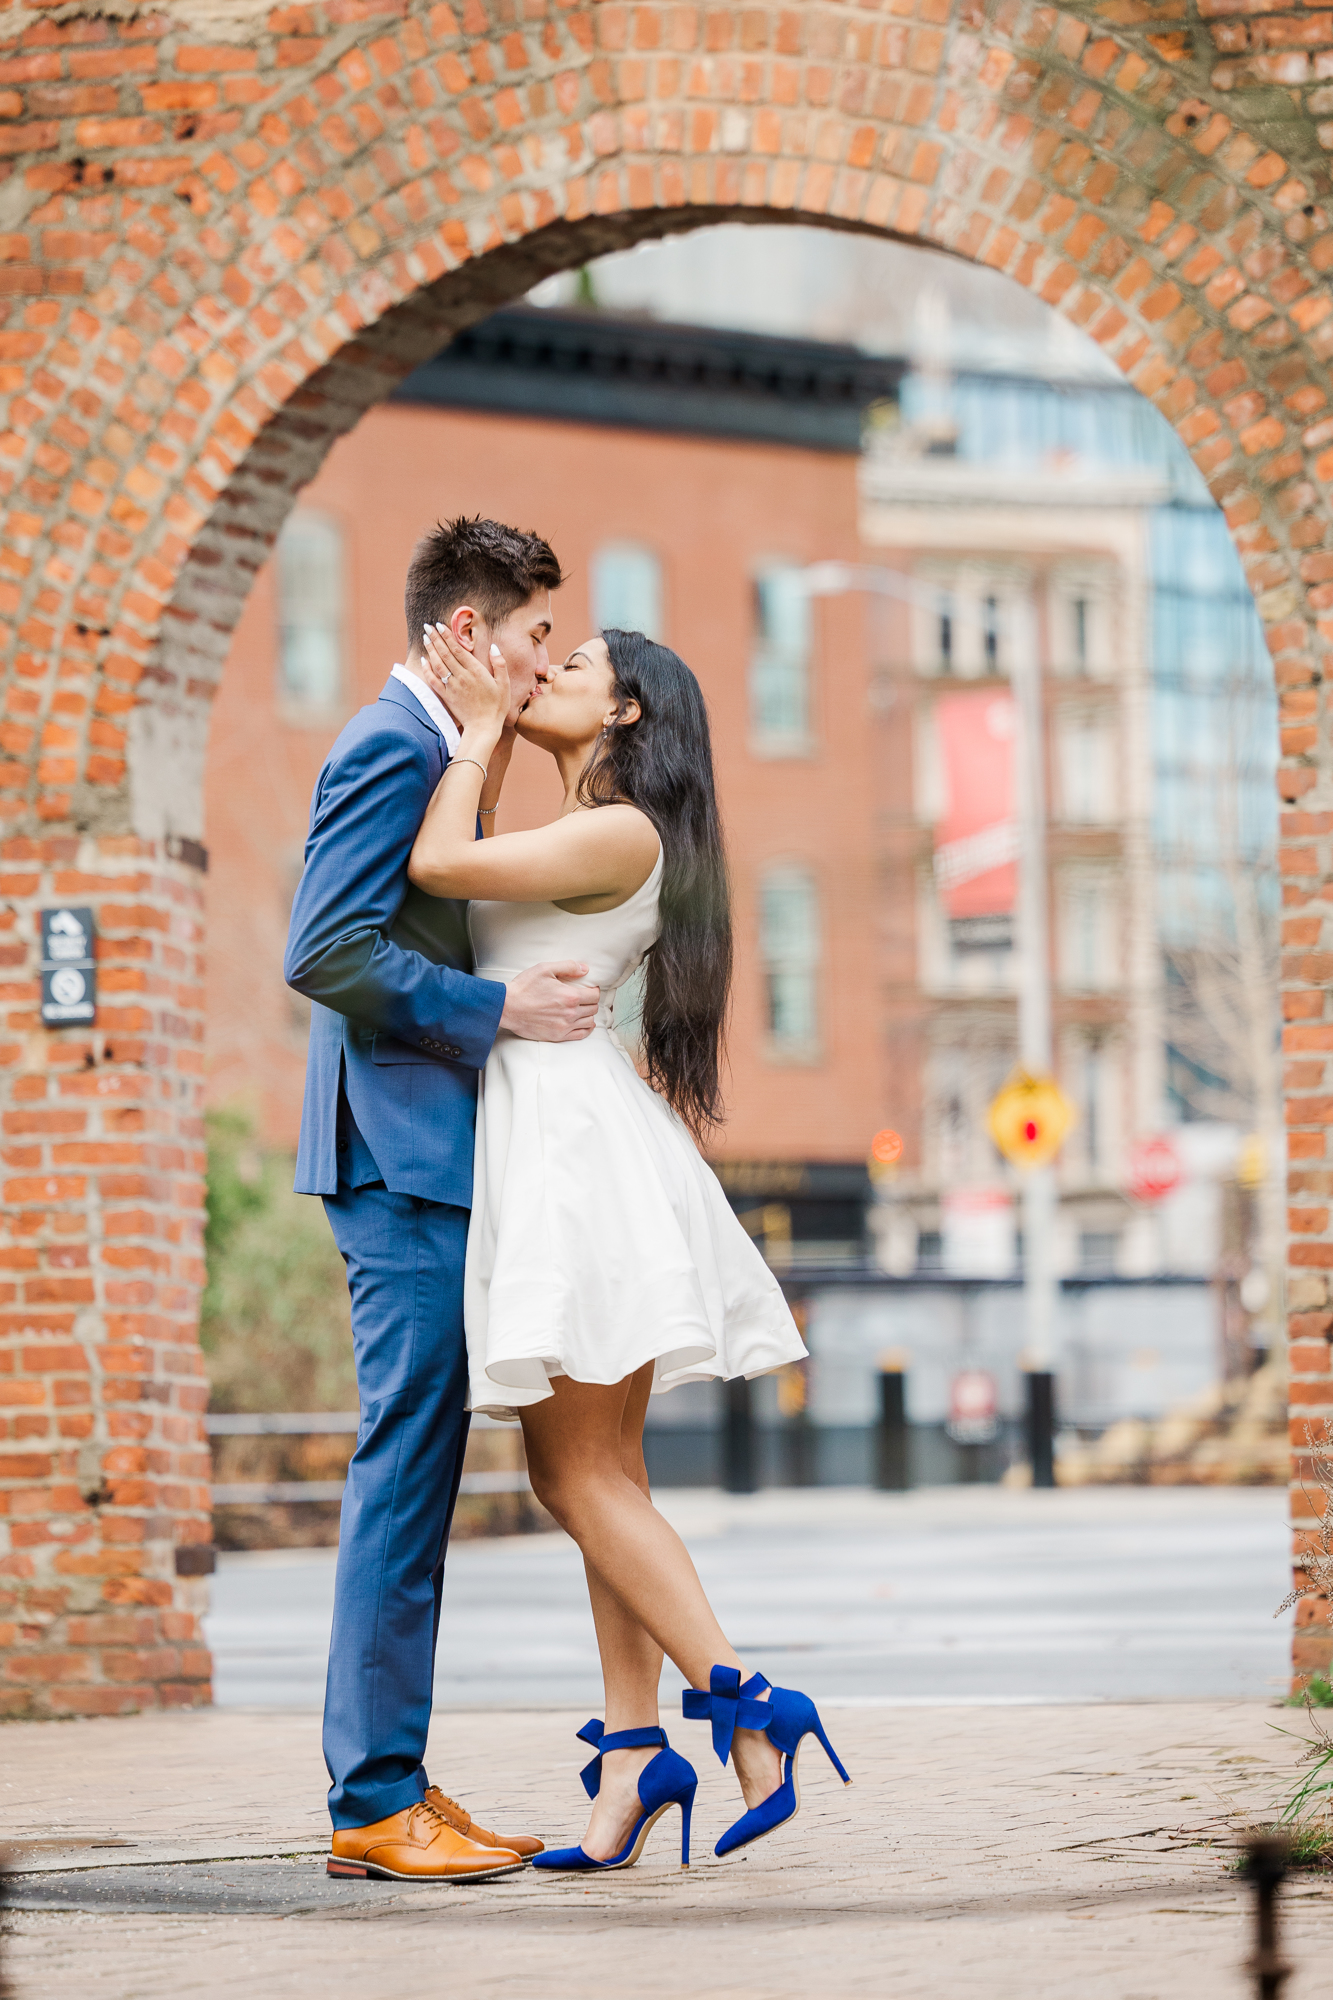 Intimate Spring Engagement Photography in DUMBO